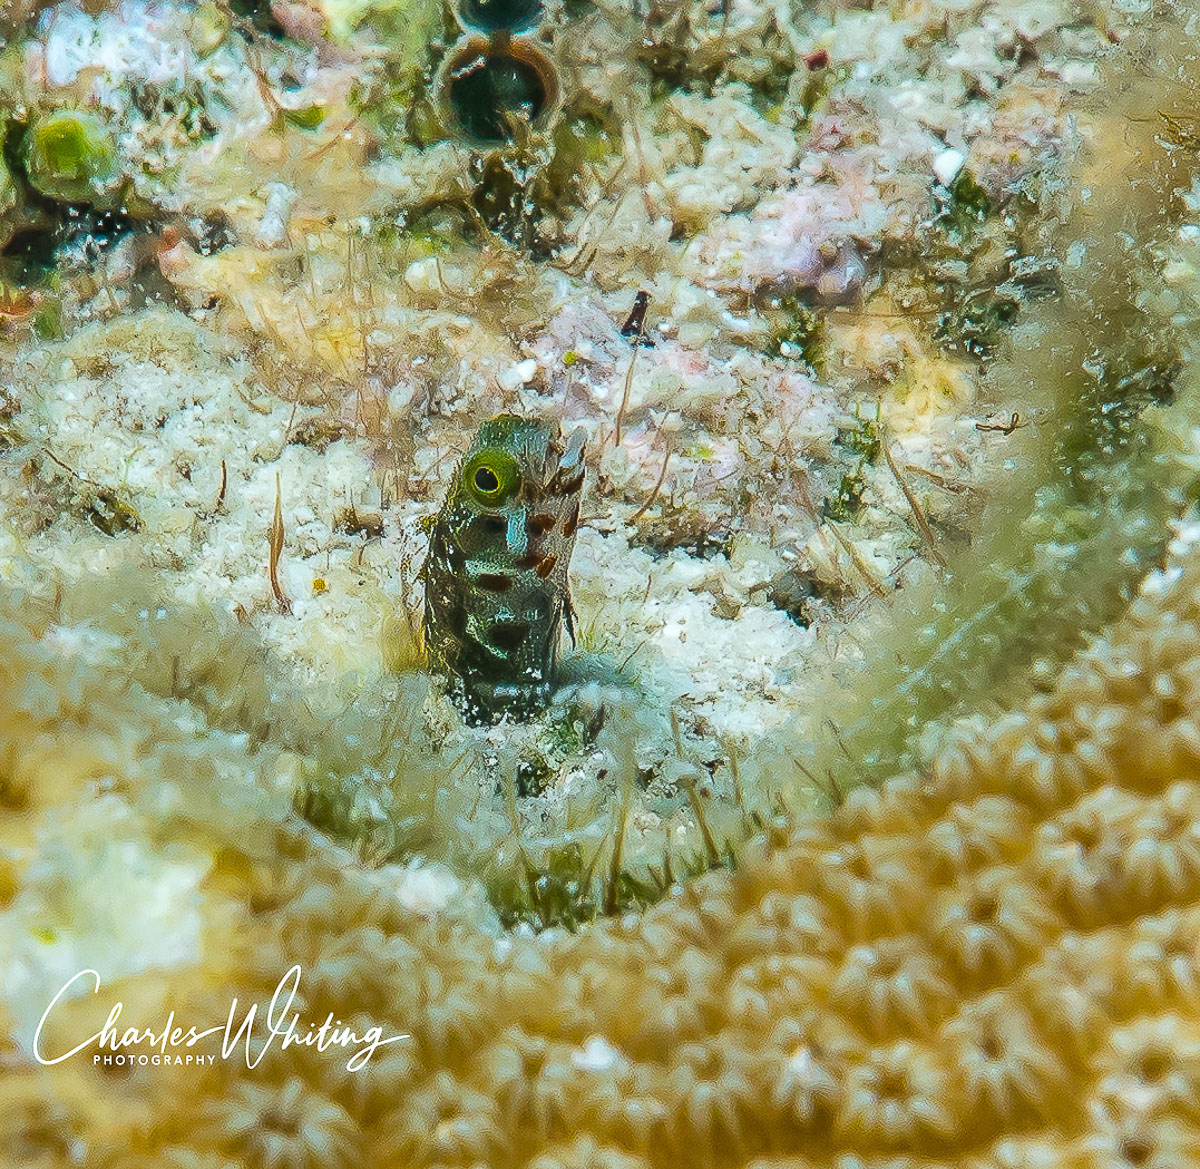 A Spinyhead Blenny peeks out from a coral head